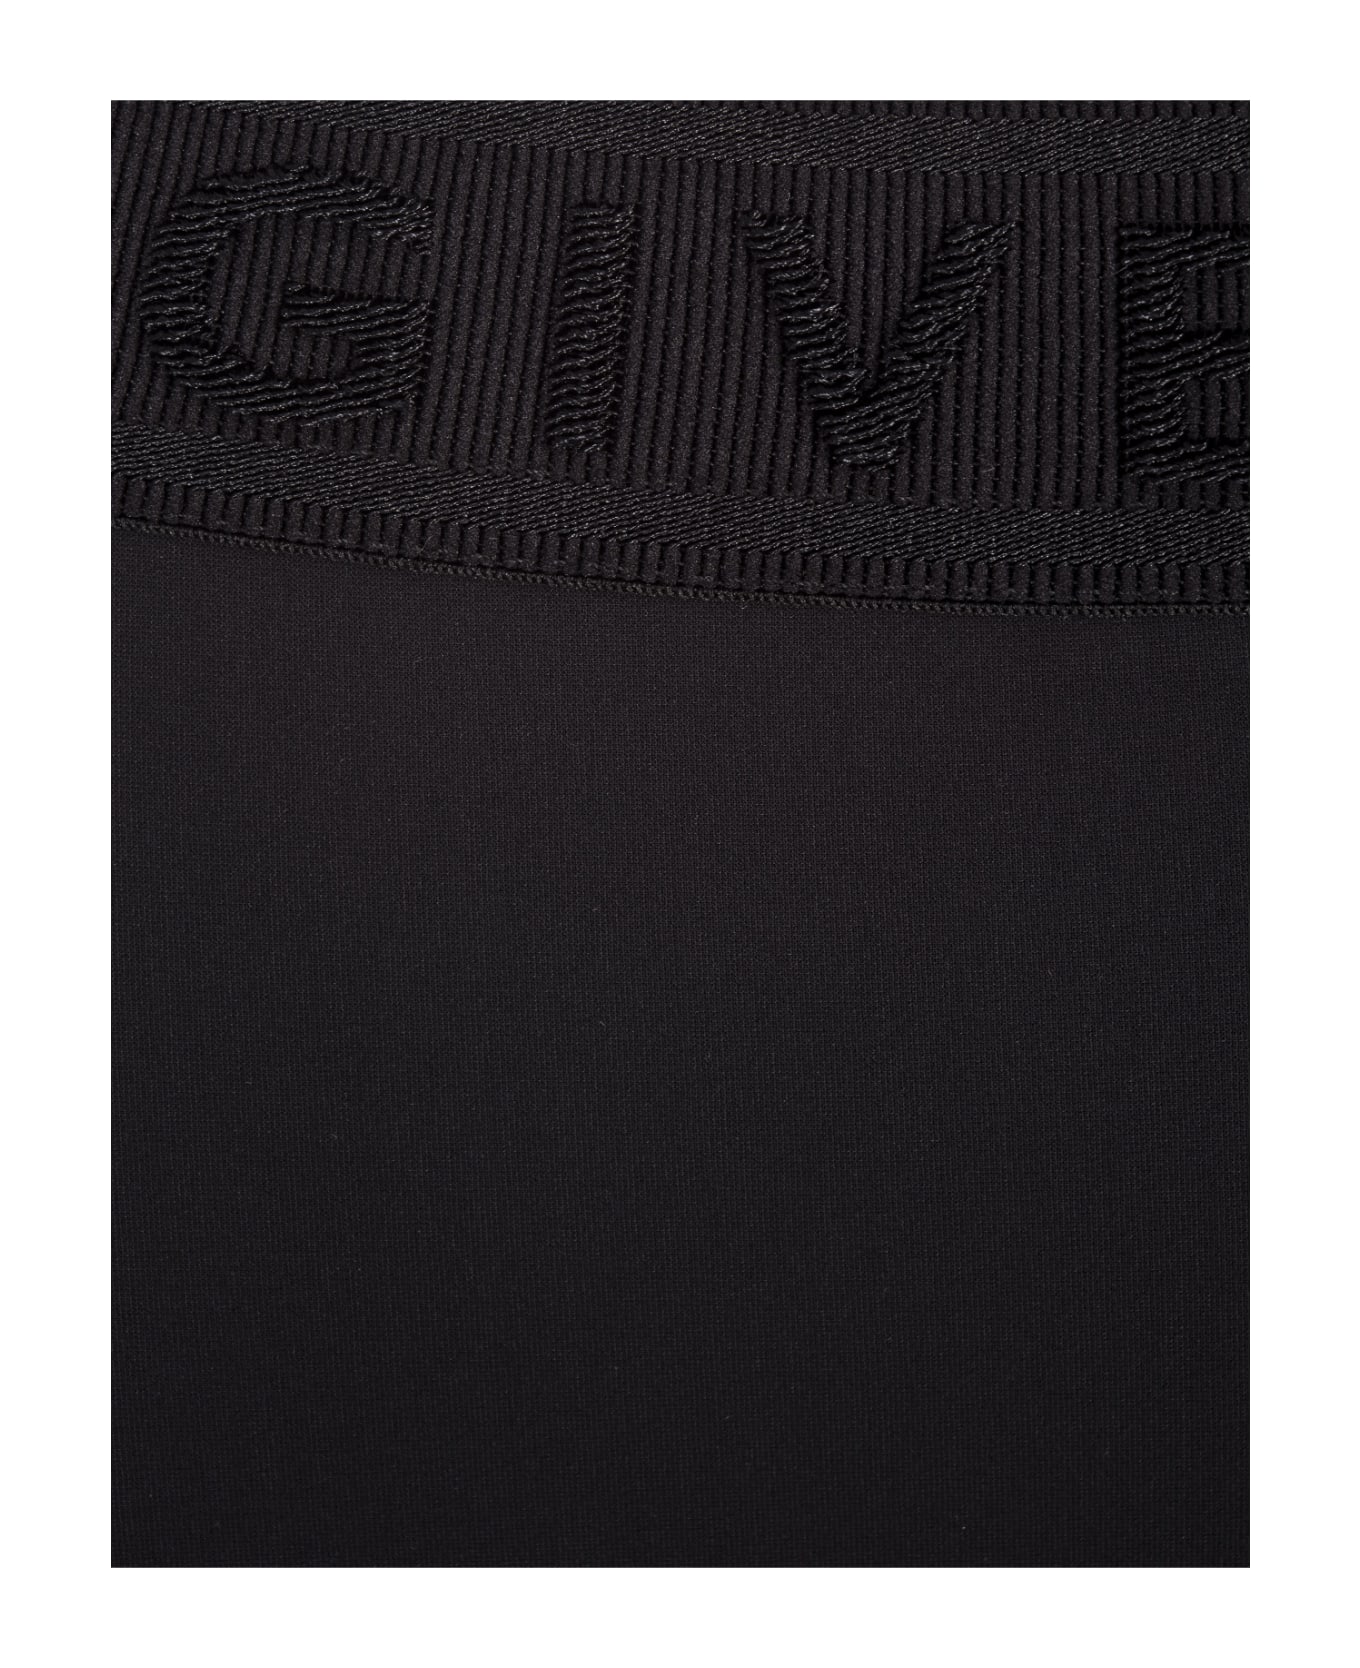 Givenchy Black Jersey Leggings With Givenchy Belt - Black